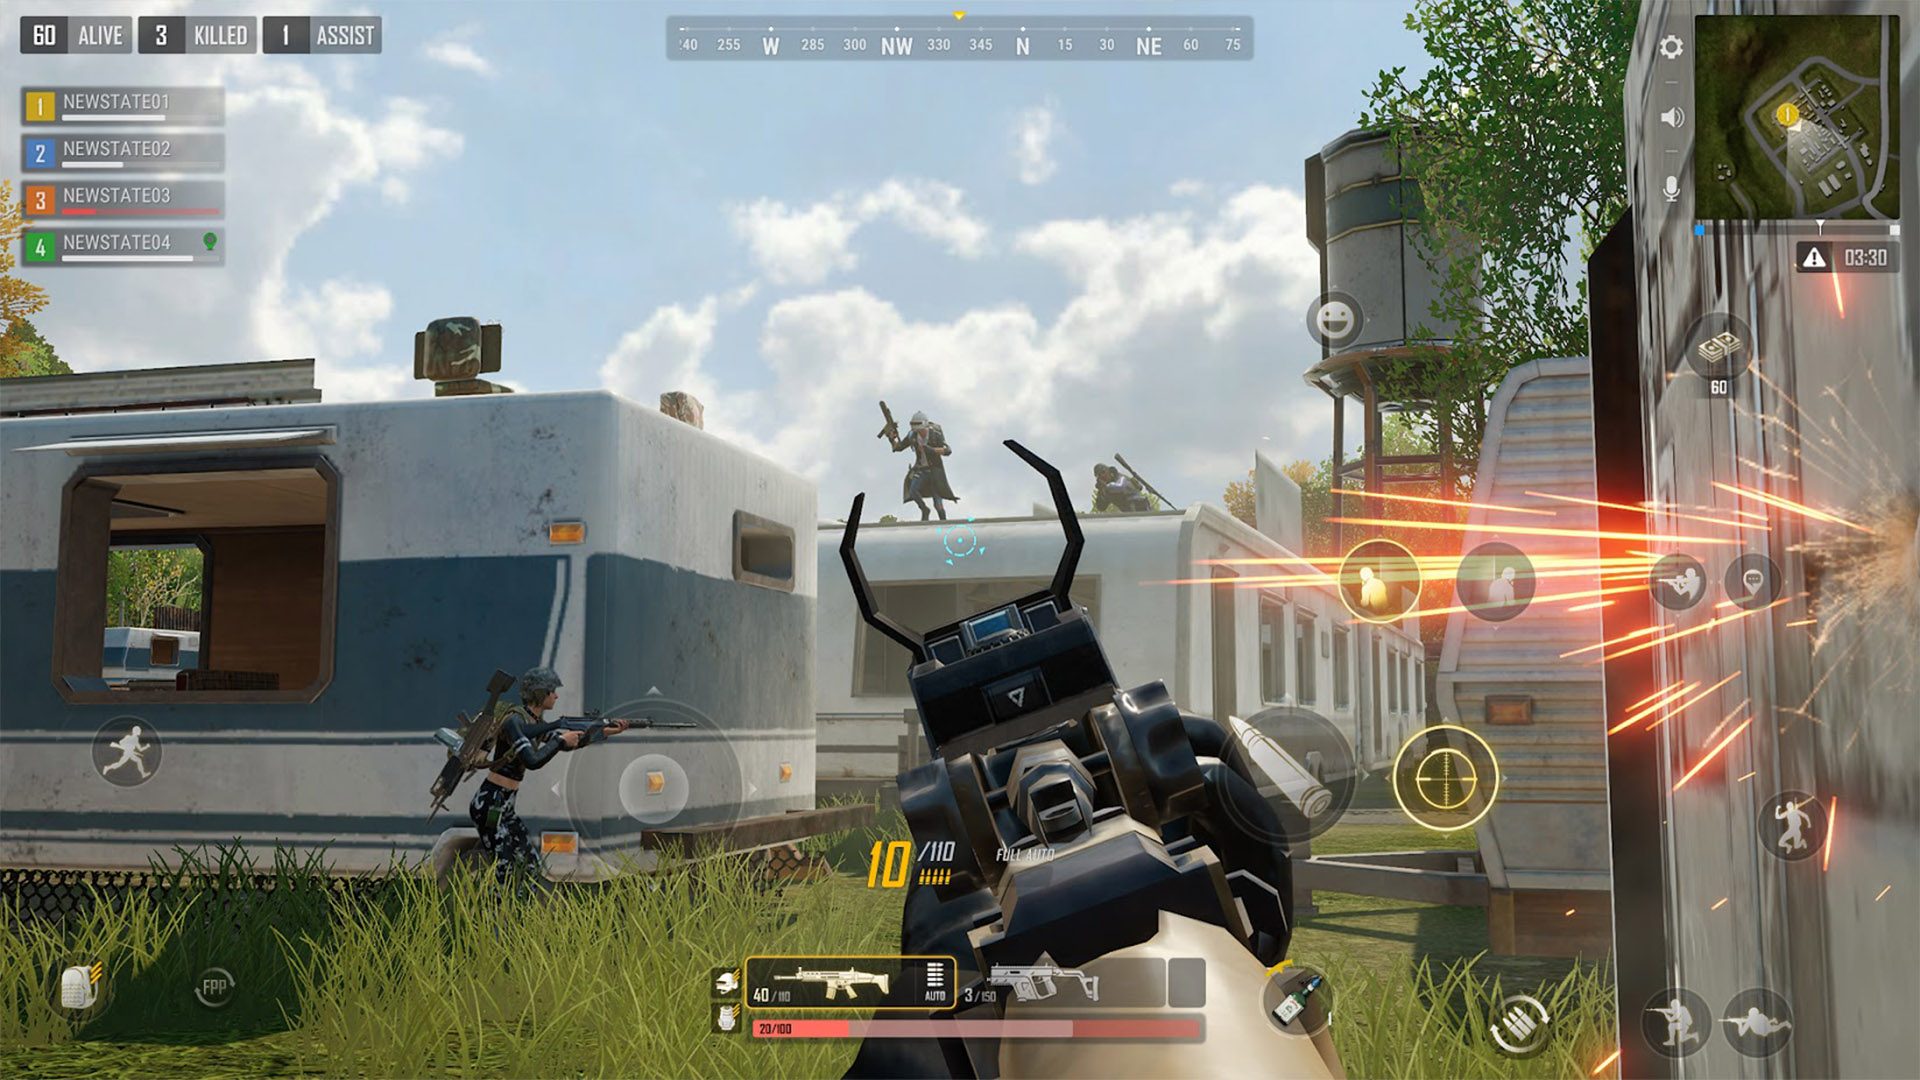 android-apps-weekly-pubg-new-state-screenshot-4857360